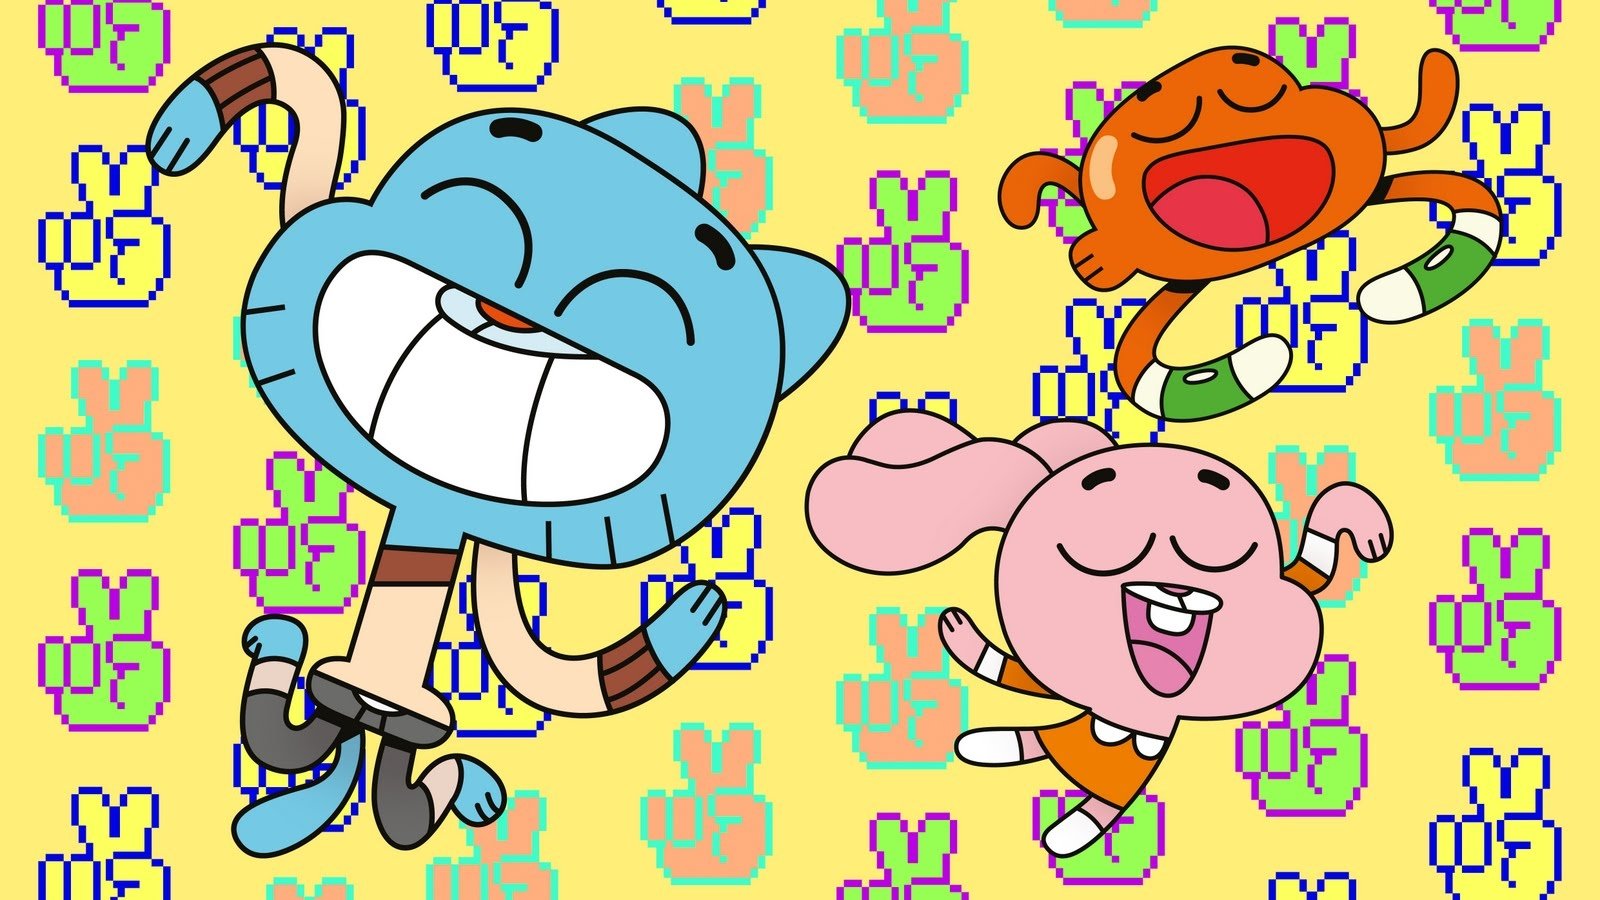 The Amazing World Of Gumball Wallpapers